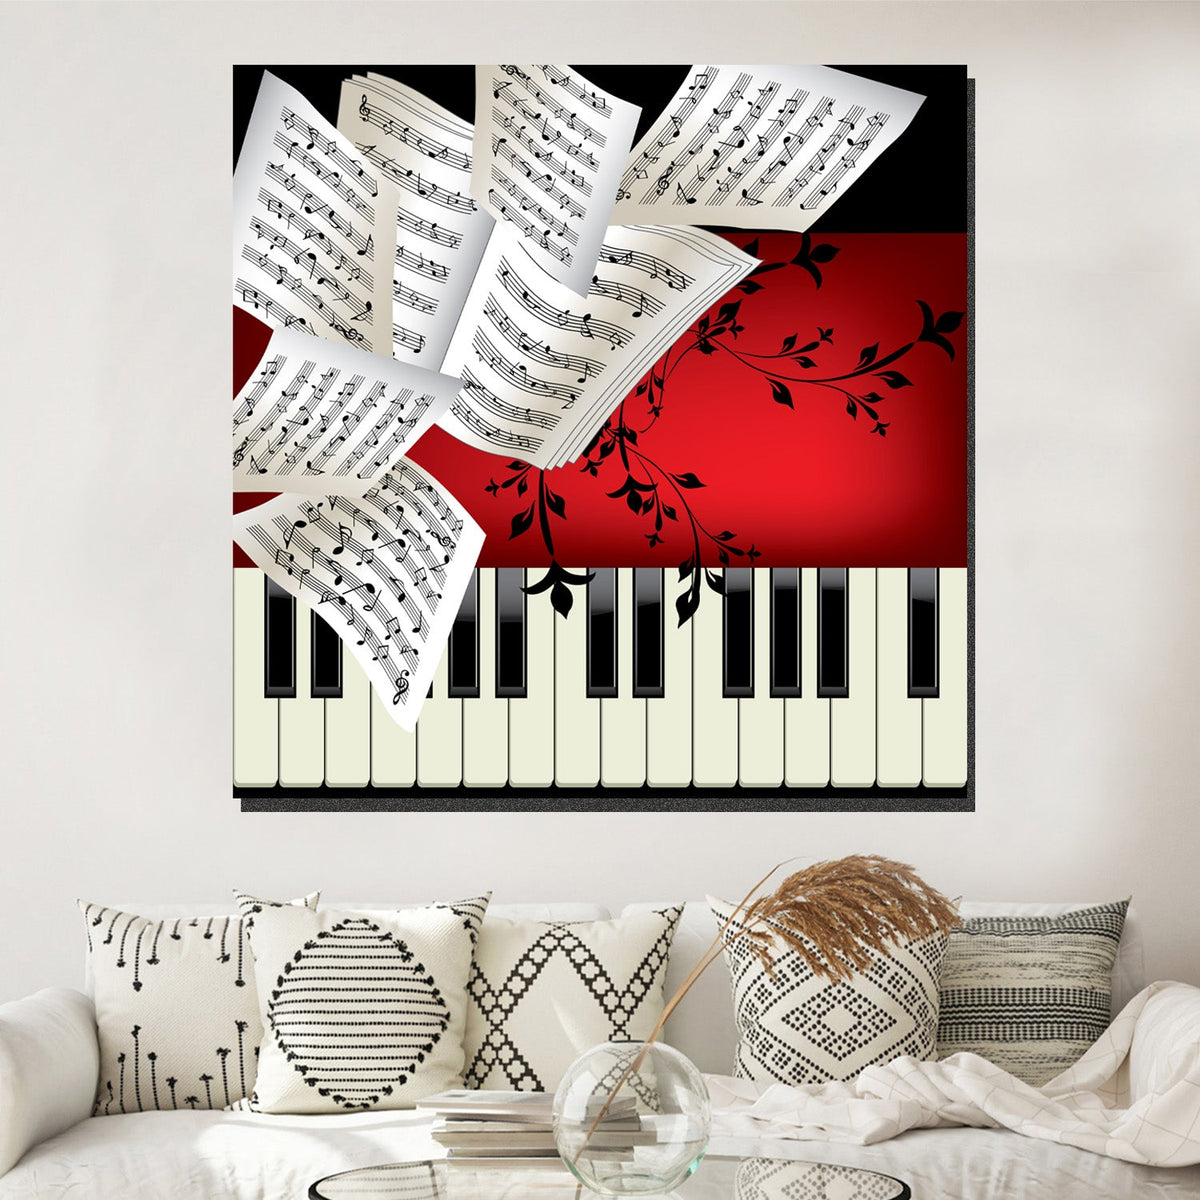 https://cdn.shopify.com/s/files/1/0387/9986/8044/products/MusicalNotesOnPianoCanvasArtprintStretched-4.jpg